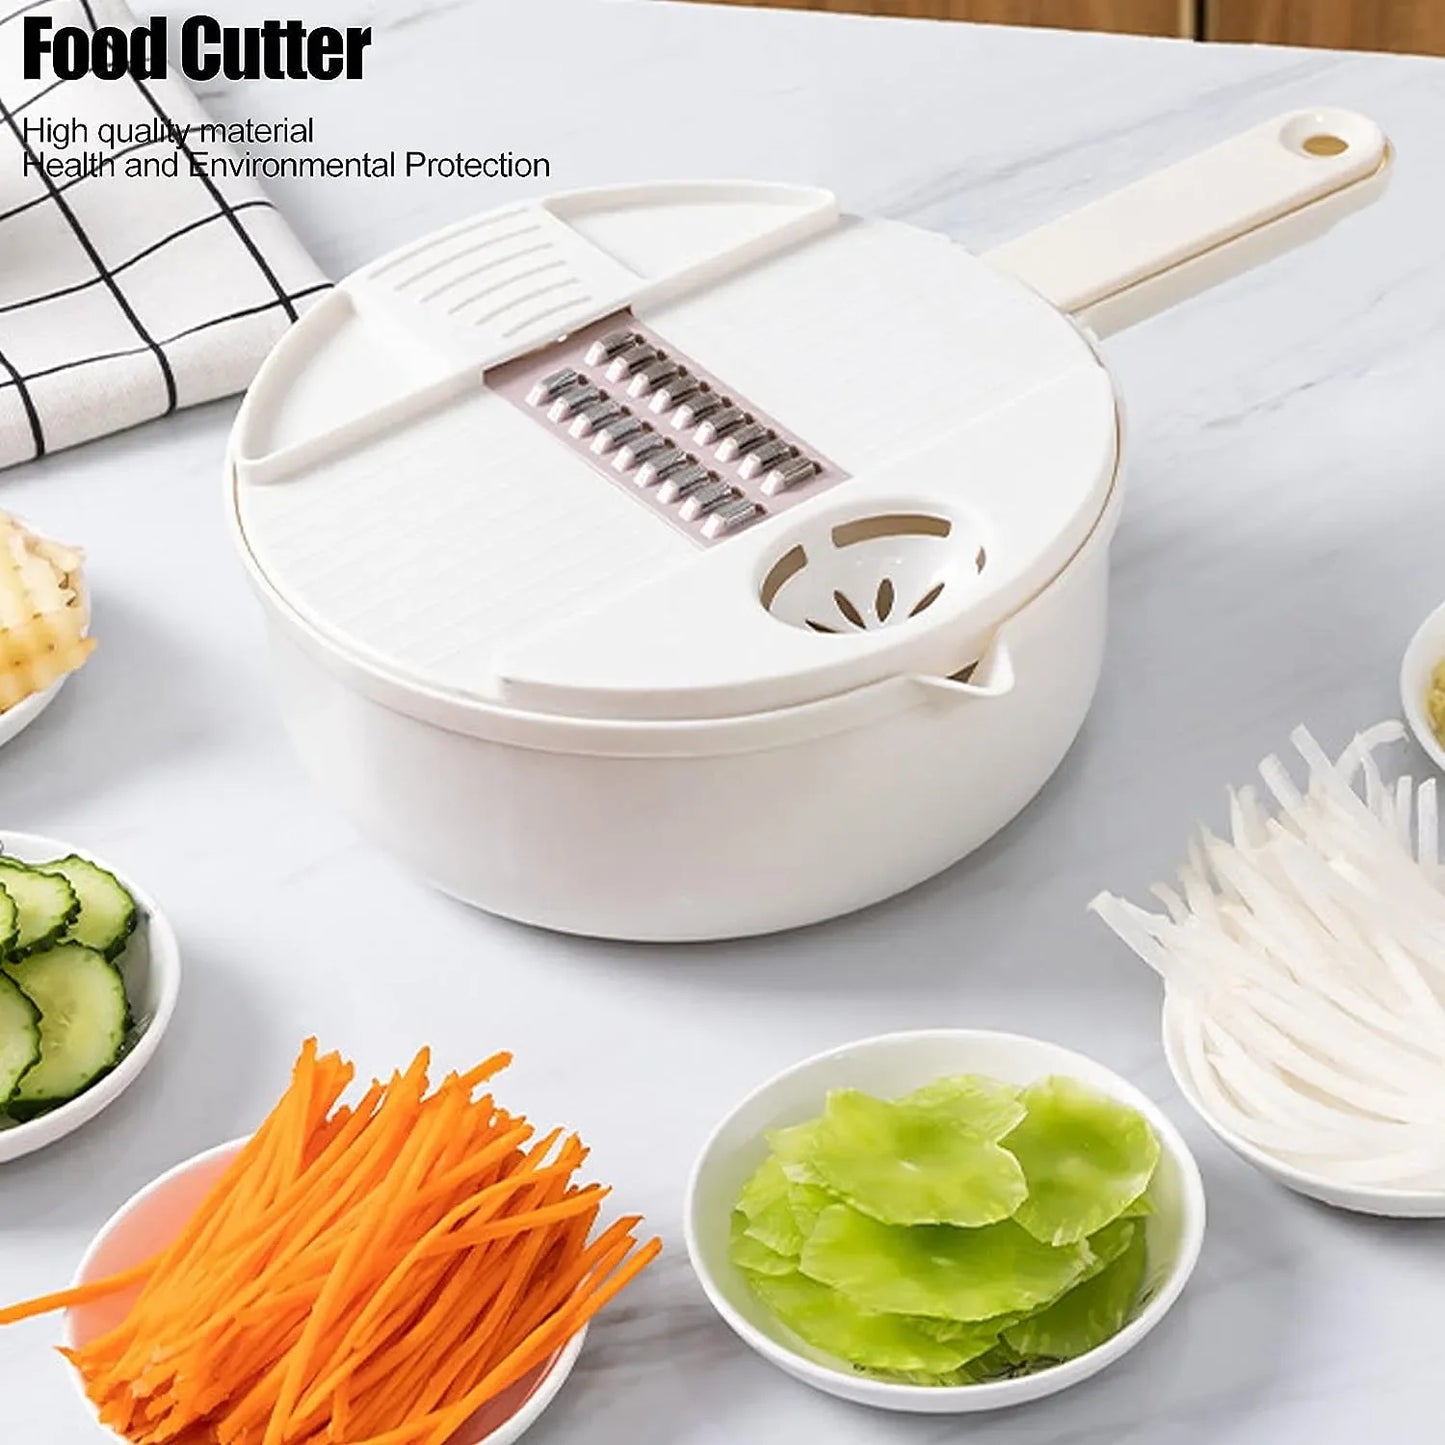 12 in 1 Multi-Function Vegetable Cutter Manually Chopper Carrots Cucumber Potatoes Shred Grater for Kitchen Vegetable Fruit Tool